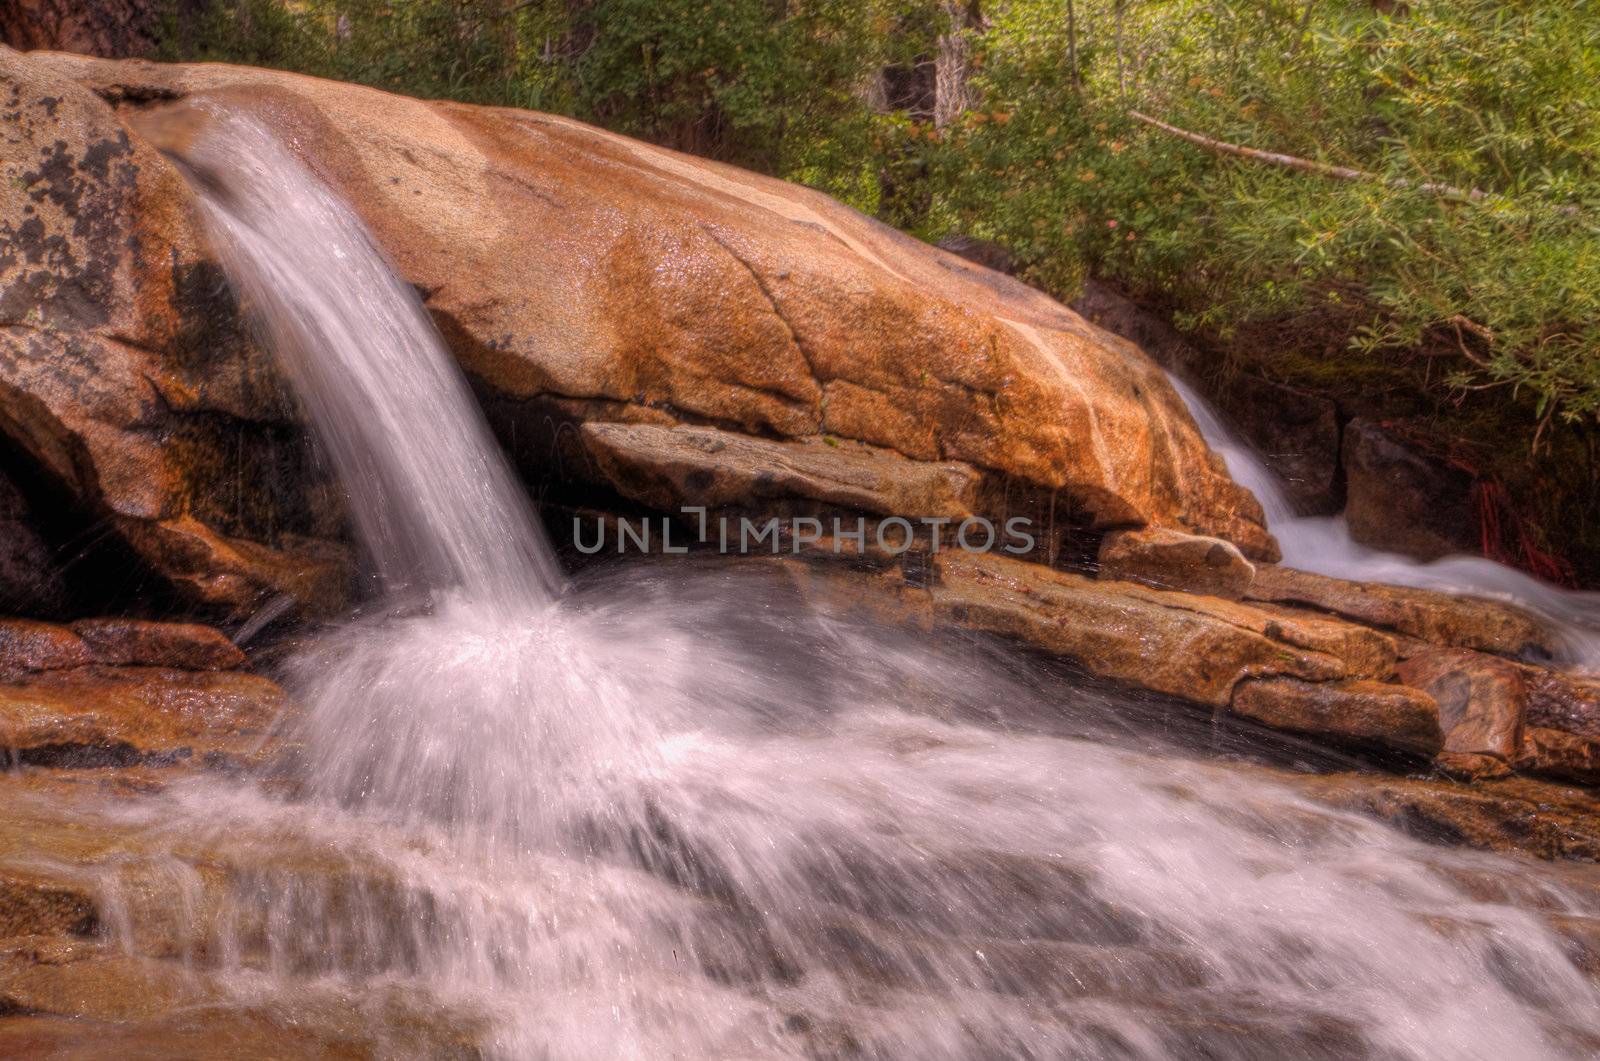 Small single waterfall cascading down mountain boulders into shallow water with forest background in HDR